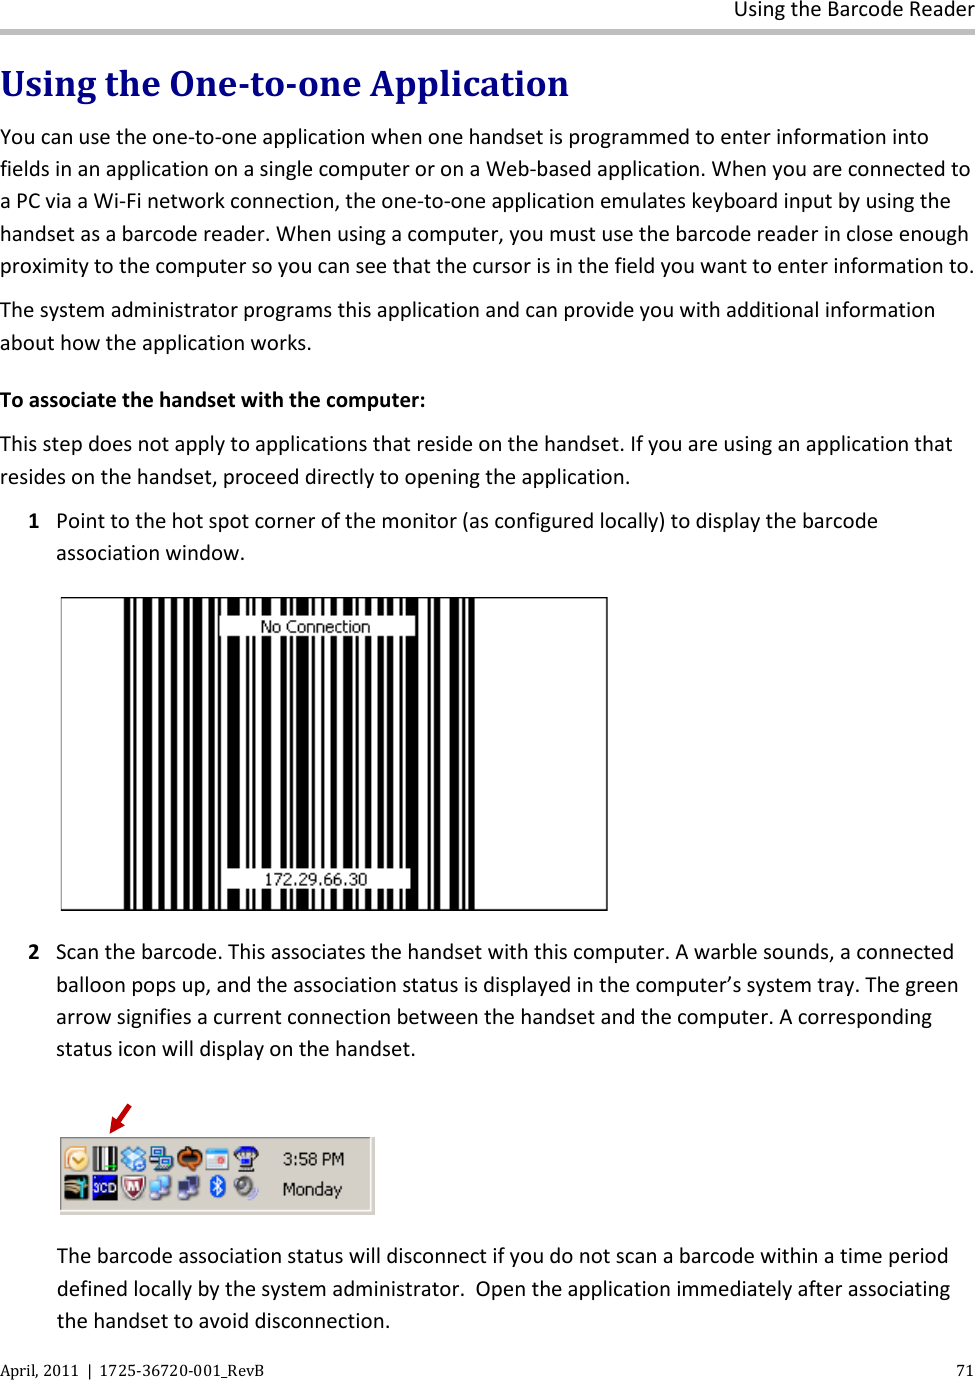  Using the Barcode Reader April, 2011  |  1725-36720-001_RevB    71  Using the One-to-one Application You can use the one-to-one application when one handset is programmed to enter information into fields in an application on a single computer or on a Web-based application. When you are connected to a PC via a Wi-Fi network connection, the one-to-one application emulates keyboard input by using the handset as a barcode reader. When using a computer, you must use the barcode reader in close enough proximity to the computer so you can see that the cursor is in the field you want to enter information to.  The system administrator programs this application and can provide you with additional information about how the application works. To associate the handset with the computer: This step does not apply to applications that reside on the handset. If you are using an application that resides on the handset, proceed directly to opening the application. 1 Point to the hot spot corner of the monitor (as configured locally) to display the barcode association window.   2 Scan the barcode. This associates the handset with this computer. A warble sounds, a connected balloon pops up, and the association status is displayed in the computer’s system tray. The green arrow signifies a current connection between the handset and the computer. A corresponding status icon will display on the handset.   The barcode association status will disconnect if you do not scan a barcode within a time period defined locally by the system administrator.  Open the application immediately after associating the handset to avoid disconnection. 